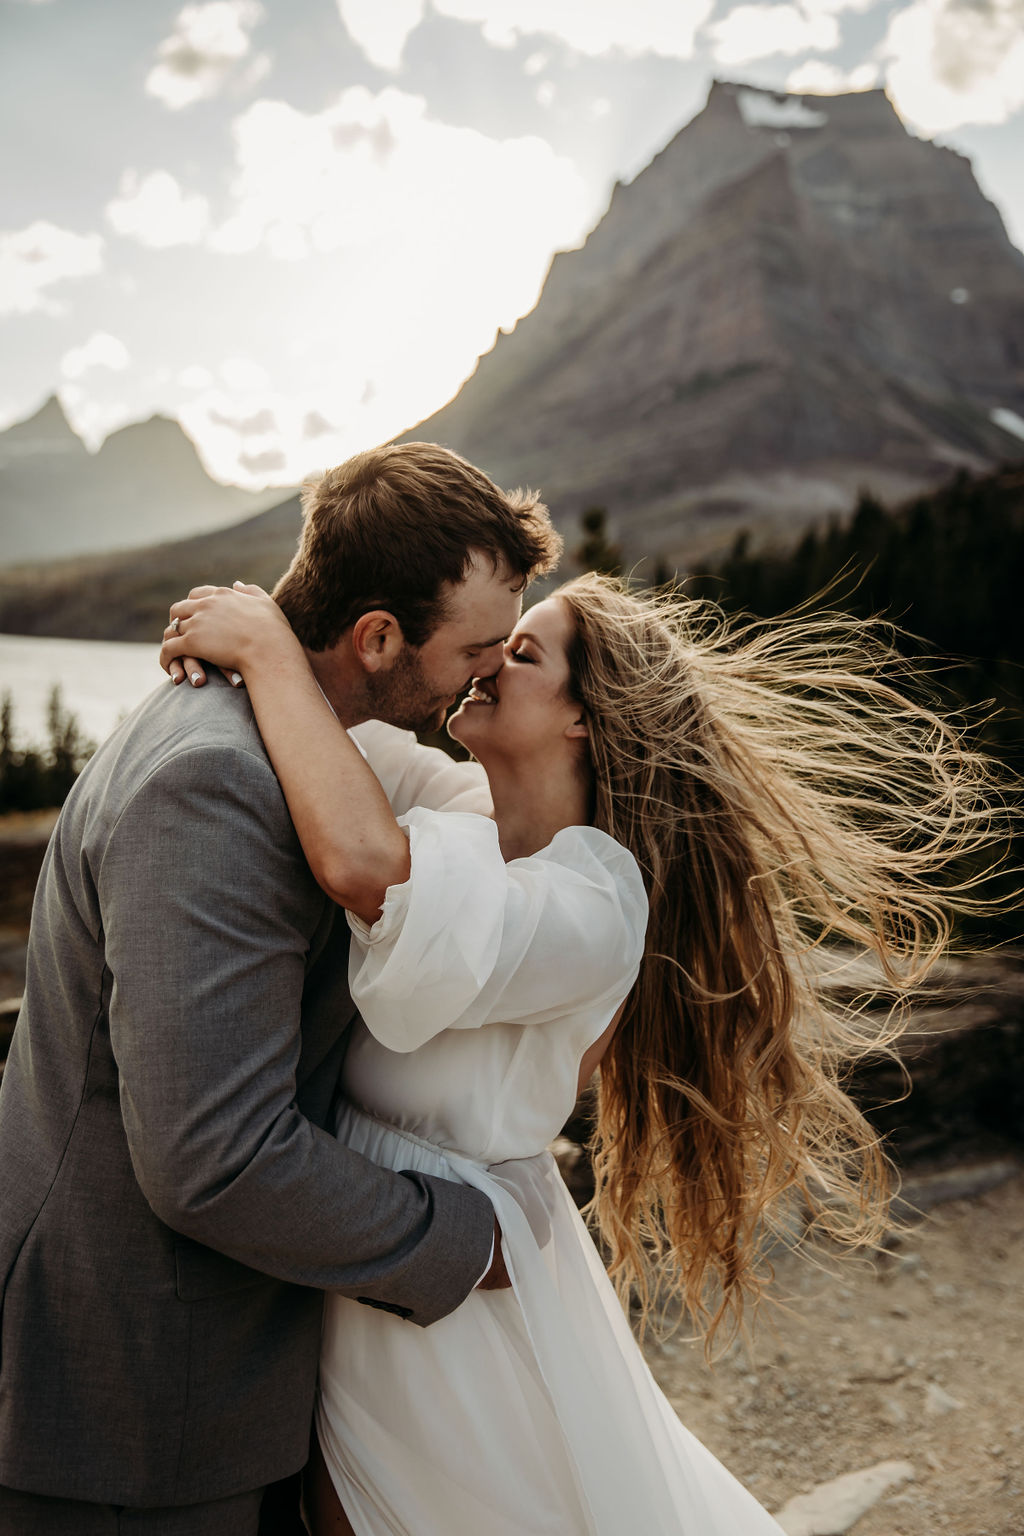 A couple embraces and kisses, surrounded by a mountainous landscape, with the woman's hair blowing in the wind taken by Montana elopement photographer